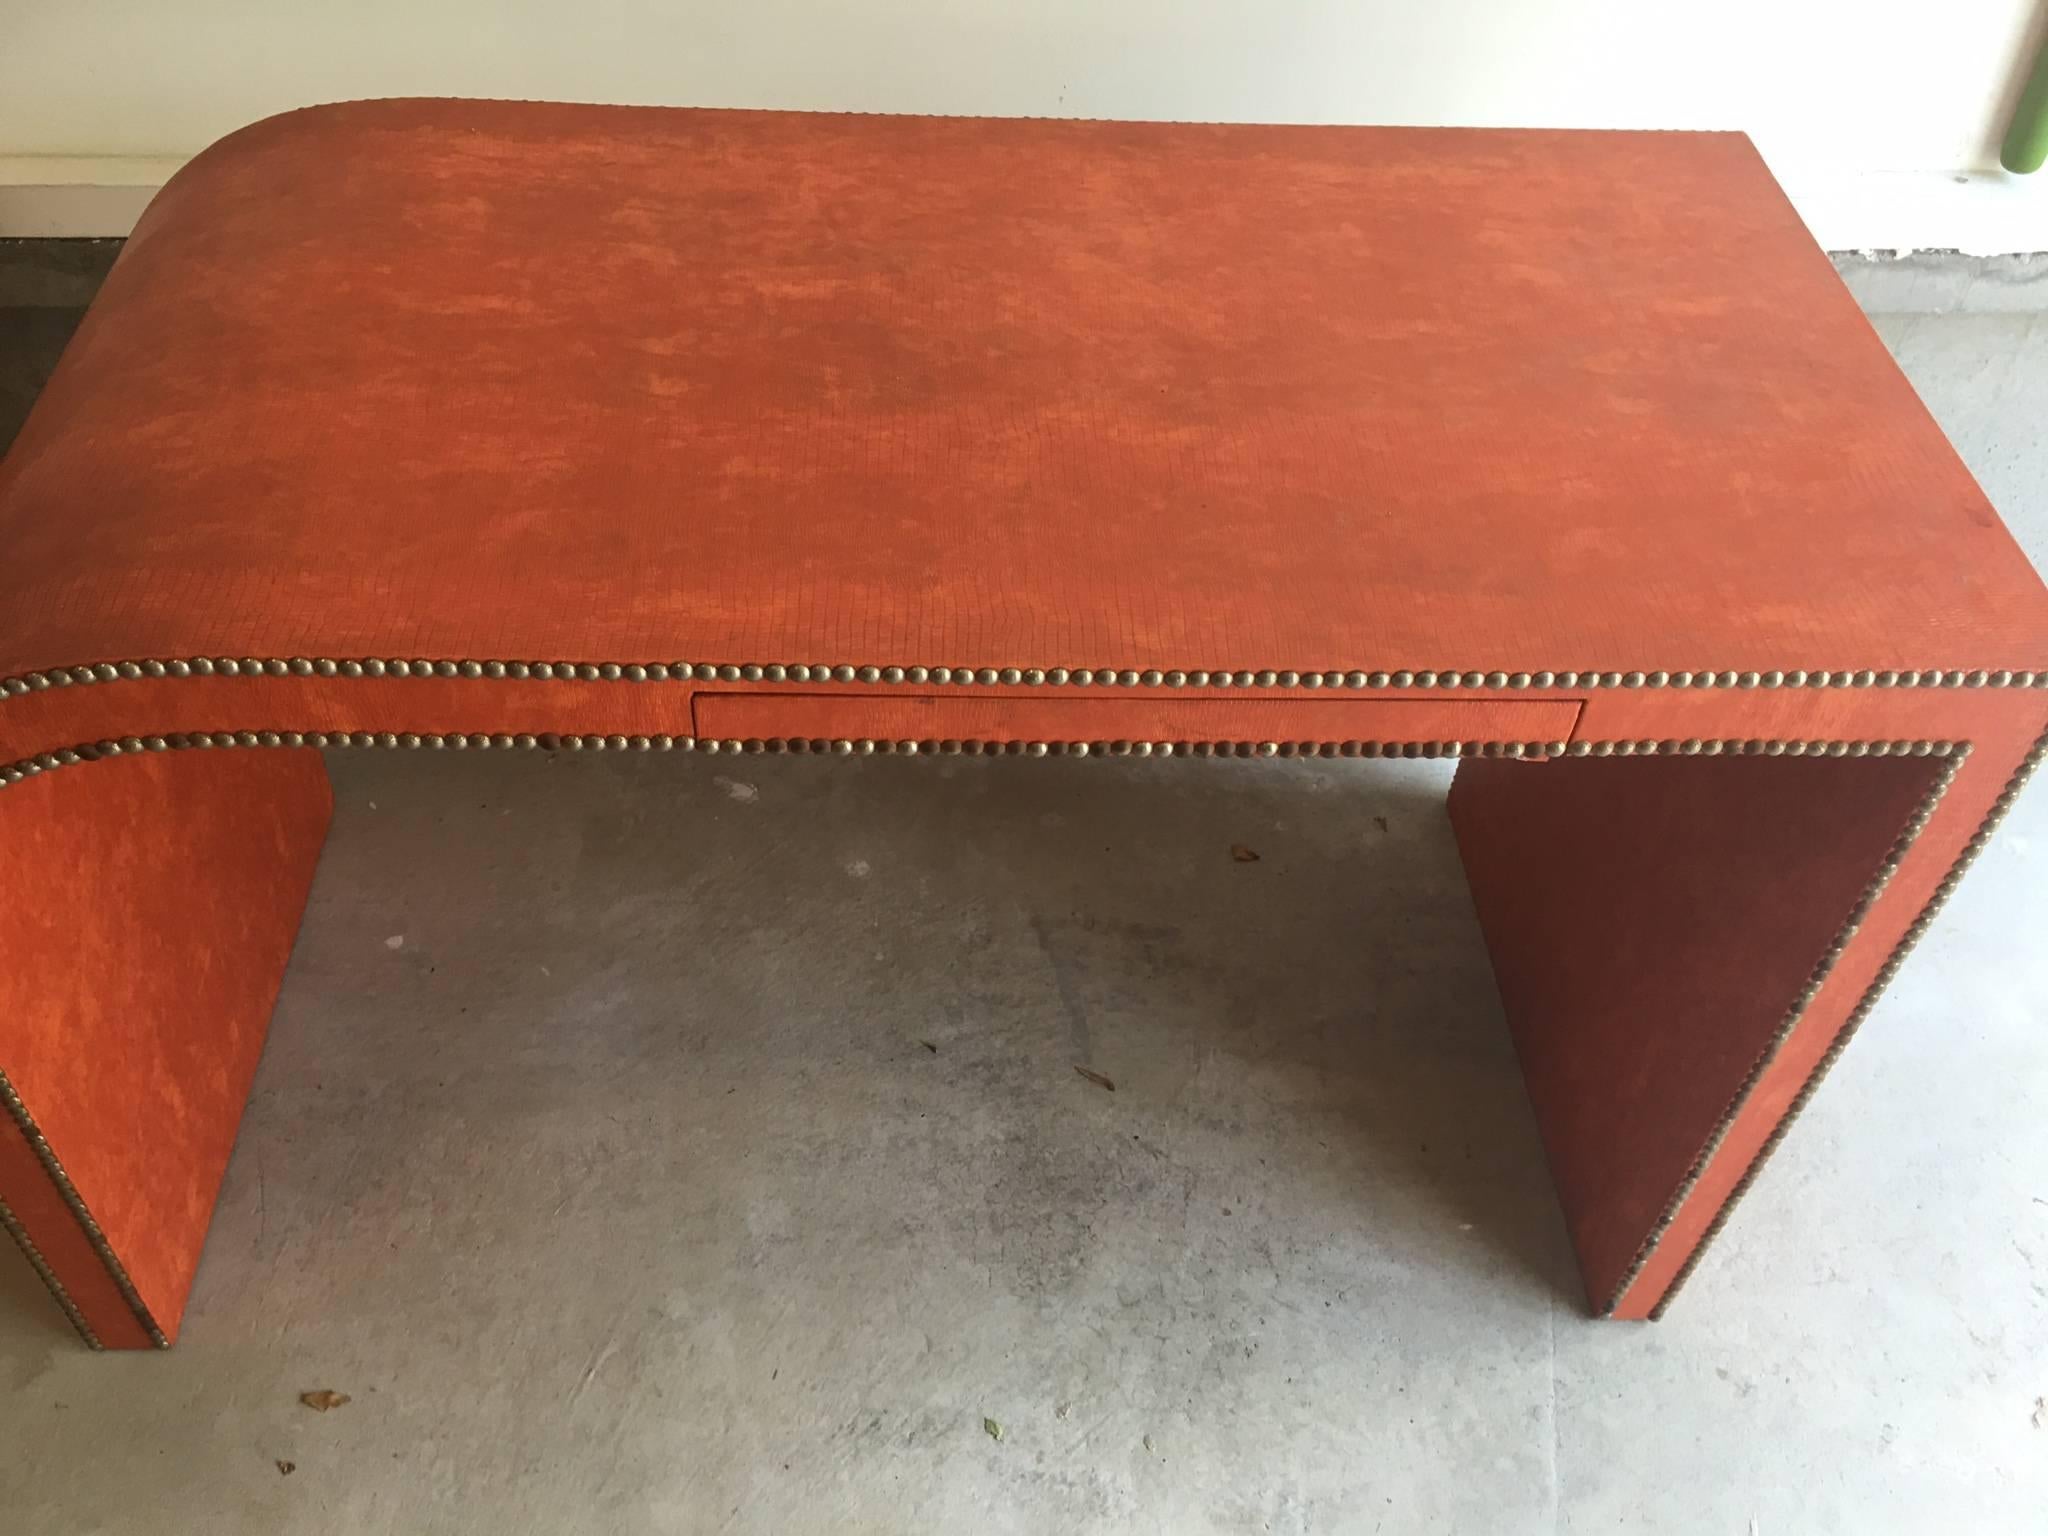 Rare Mid-Century Modern leather wrapped wood desk or console table. Sculptural design features original coral/orange embossed faux snake skin leather, aged nailhead trim detailing on front and back, and a single center drawer. Perfect size for your